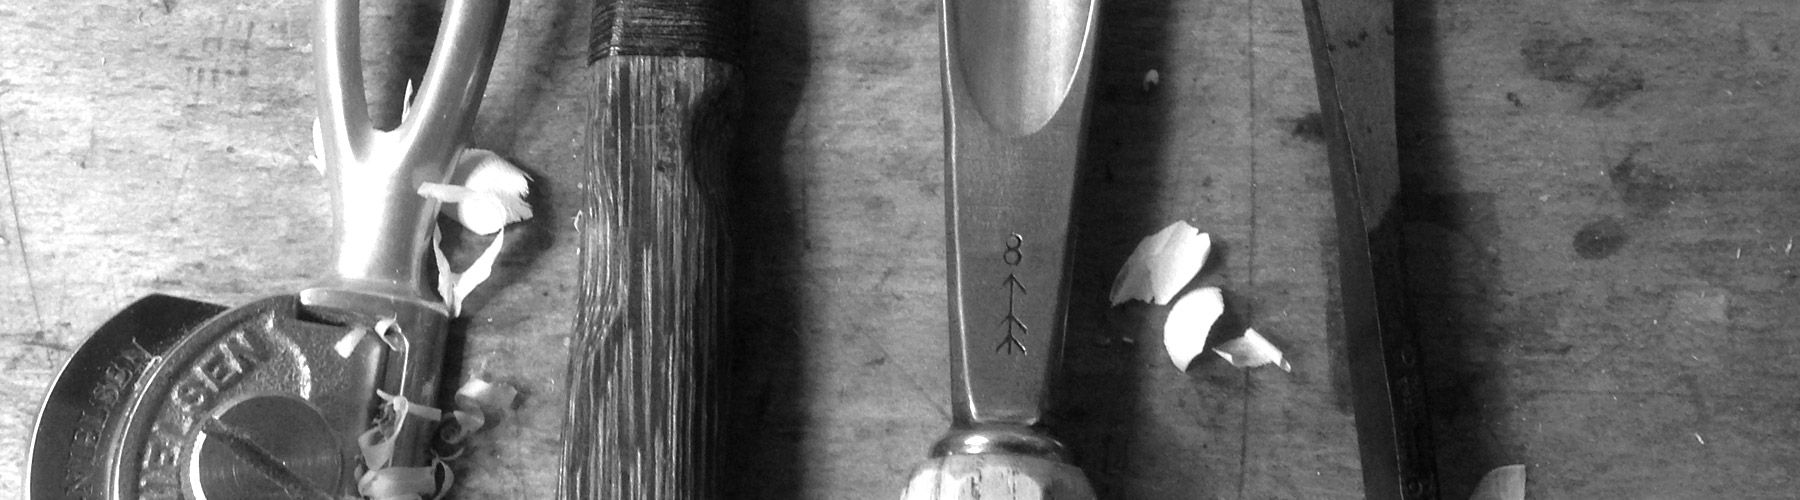 Spoon carving tools